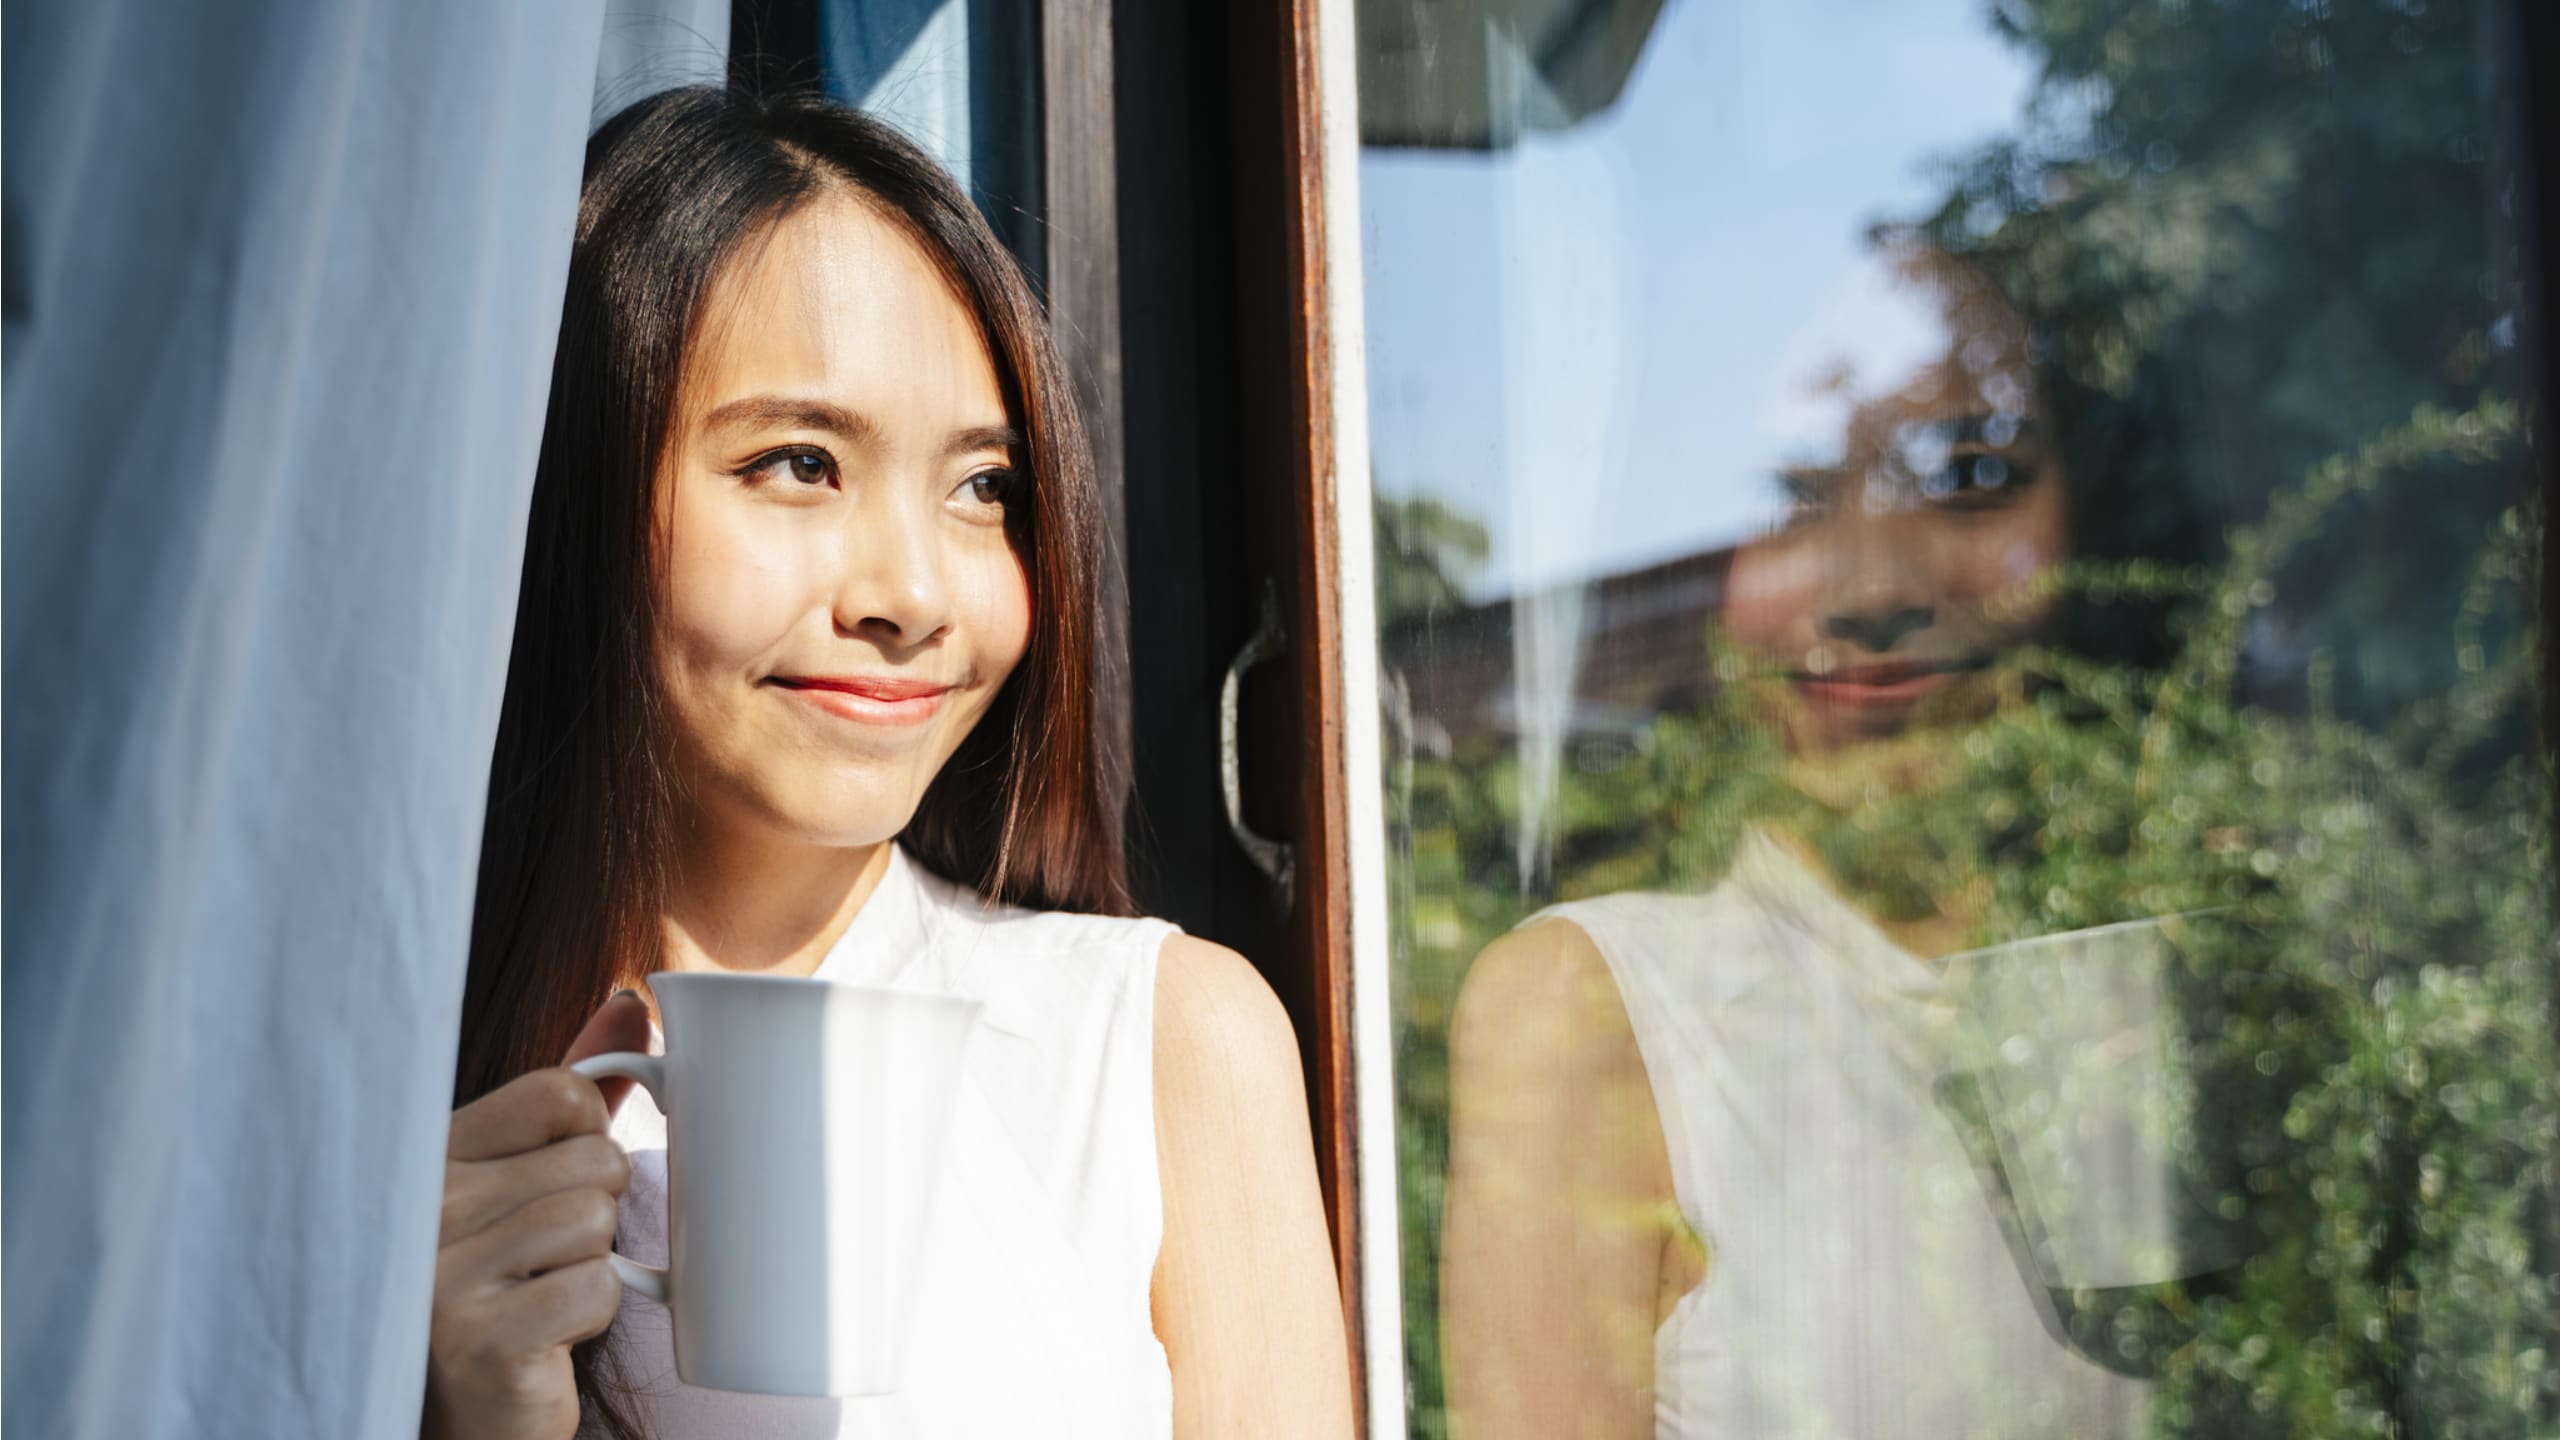 Woman enjoys a cup of tea while looking out a window.